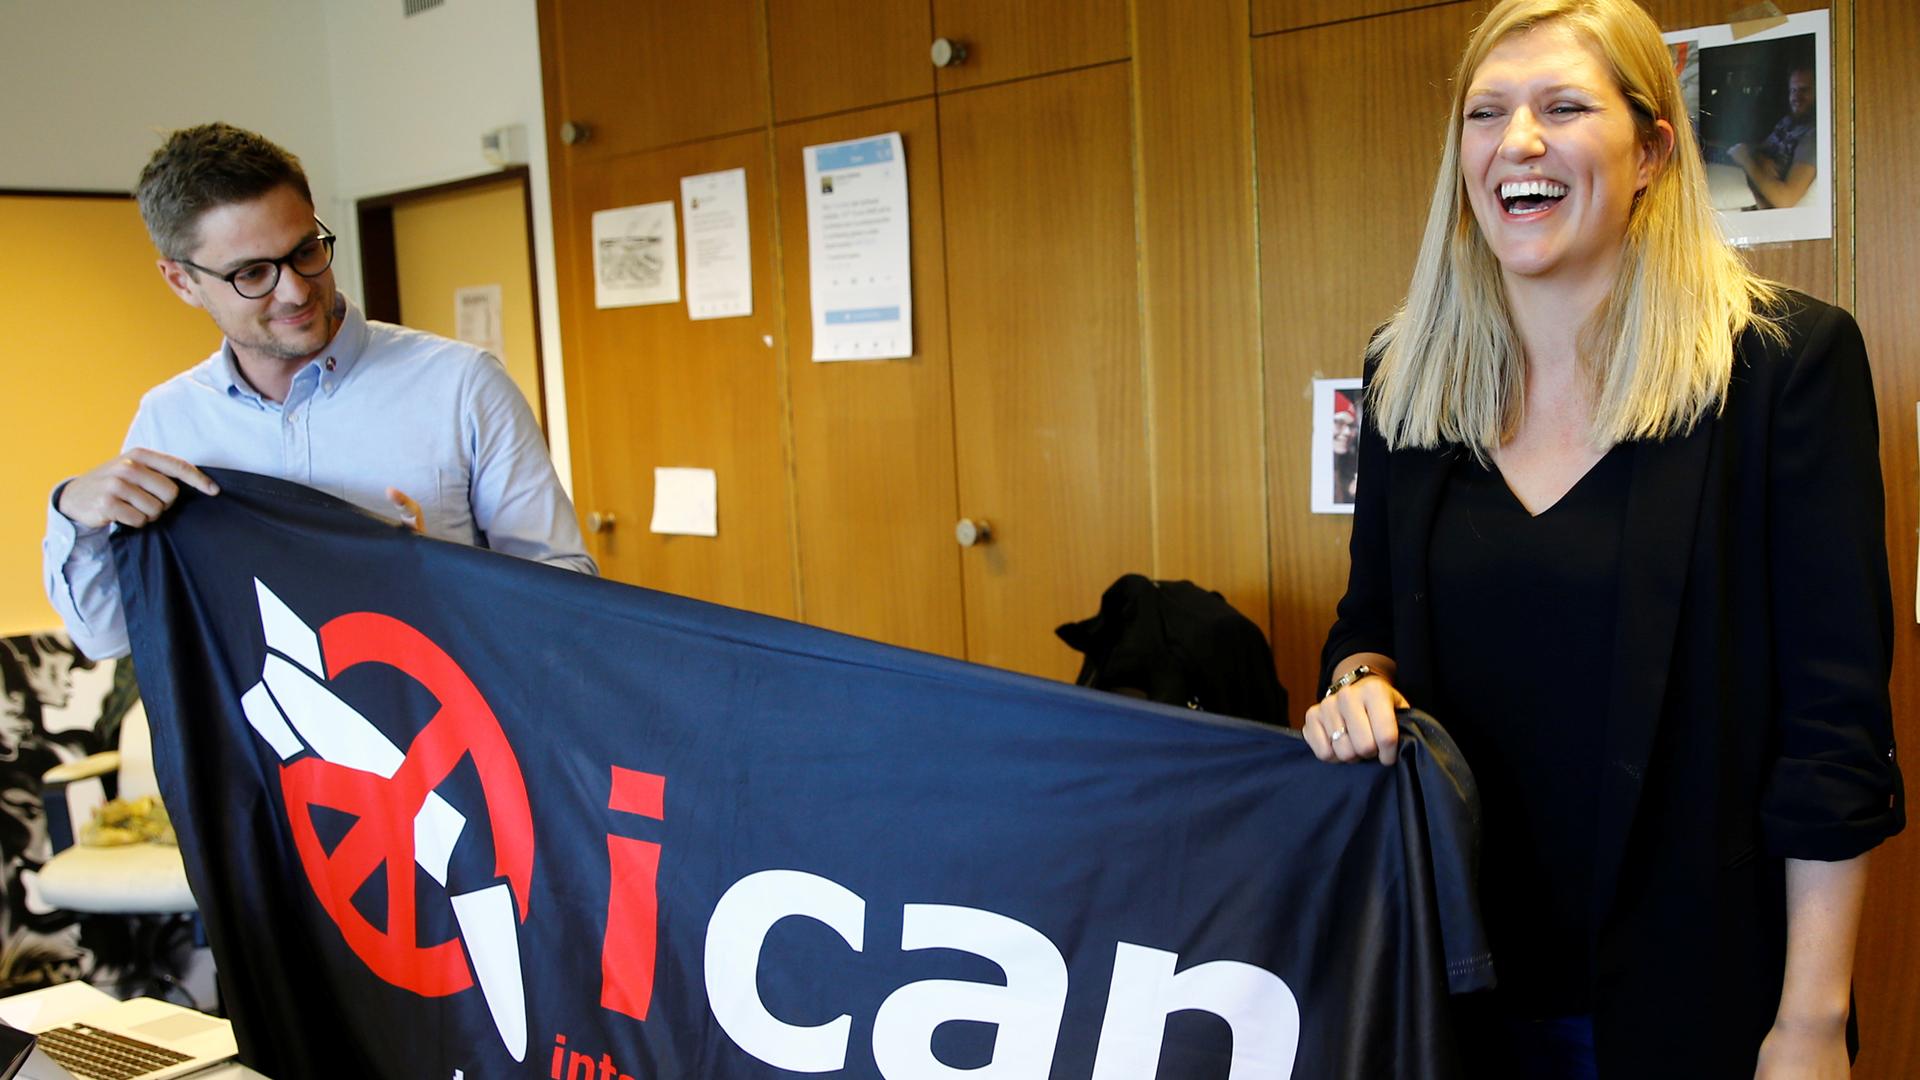 Beatrice Fihn (right), executive director of the International Campaign to Abolish Nuclear Weapons (ICAN) and Daniel Hogsta, coordinator, celebrate after winning the Nobel Peace Prize.